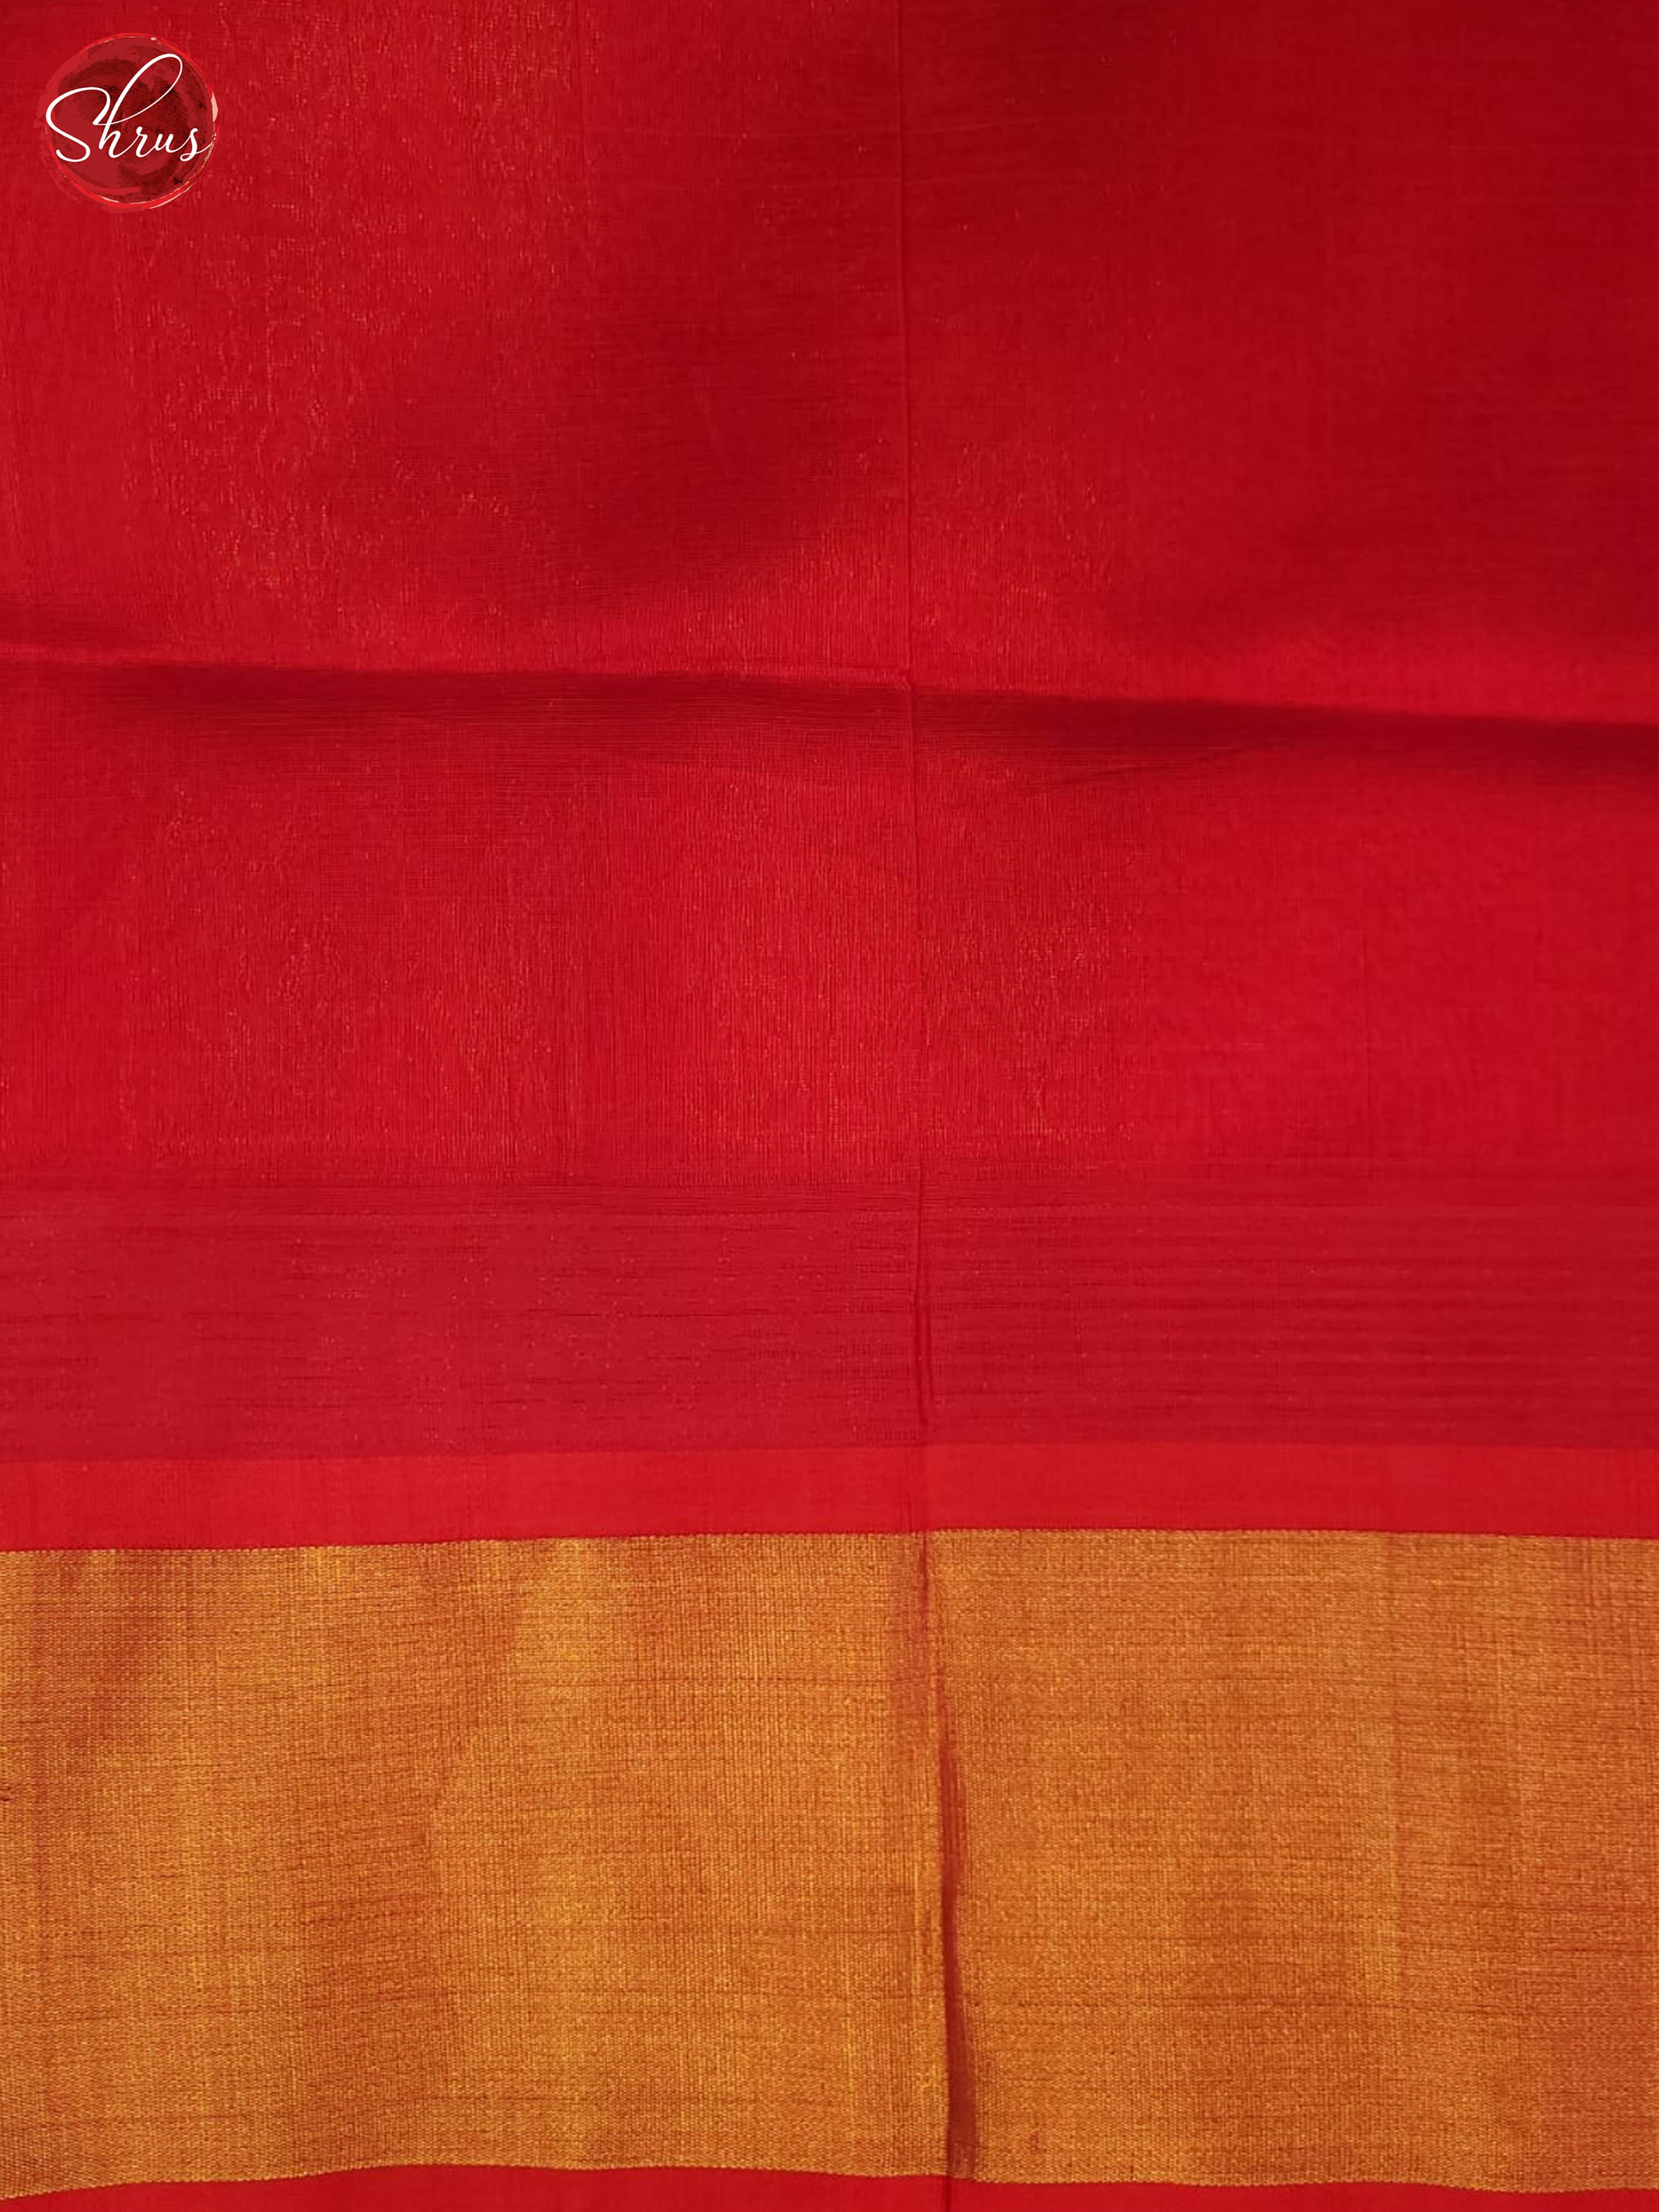 yellow and Red-Silk cotton saree - Shop on ShrusEternity.com